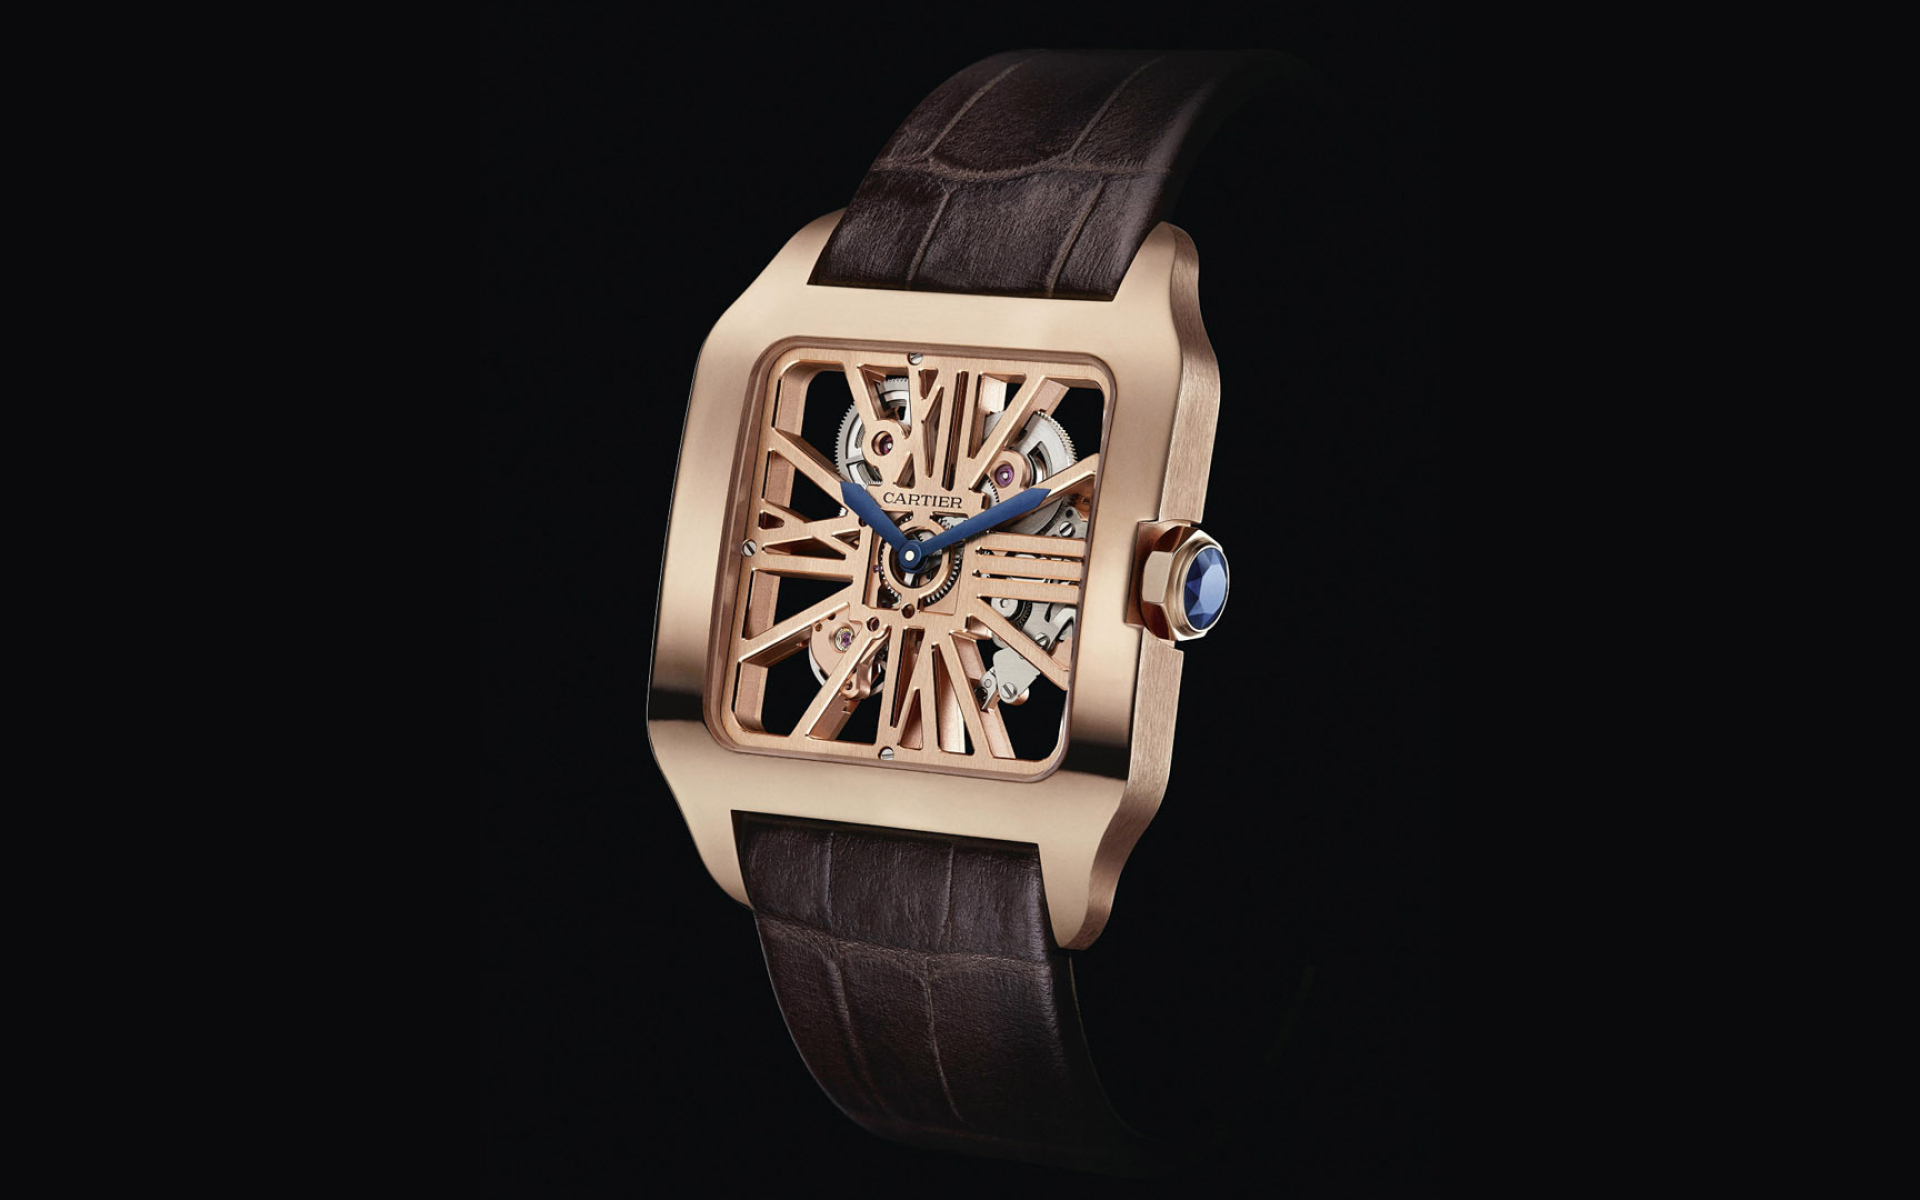 Cartier watch, Classic timepiece, Exquisite photography, Stylish accessory, 1920x1200 HD Desktop